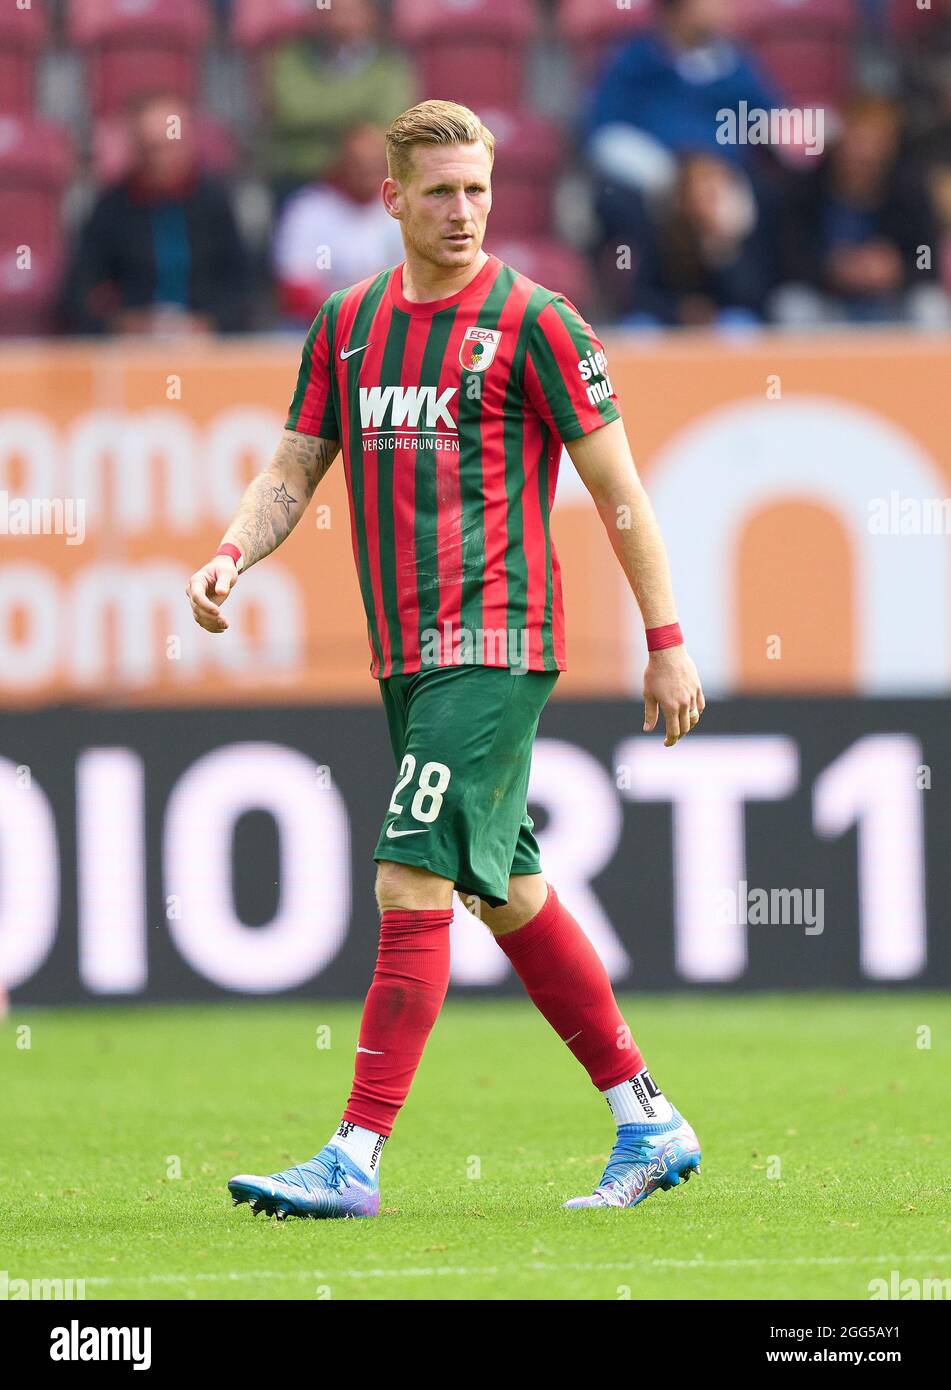 Andre HAHN, FCA 28  in the match FC AUGSBURG - BAYER 04 LEVERKUSEN 1-4 1.German Football League on August 28, 2021 in Augsburg, Germany  Season 2021/2022, matchday 3, 1.Bundesliga, 3.Spieltag. © Peter Schatz / Alamy Live News    - DFL REGULATIONS PROHIBIT ANY USE OF PHOTOGRAPHS as IMAGE SEQUENCES and/or QUASI-VIDEO - Stock Photo